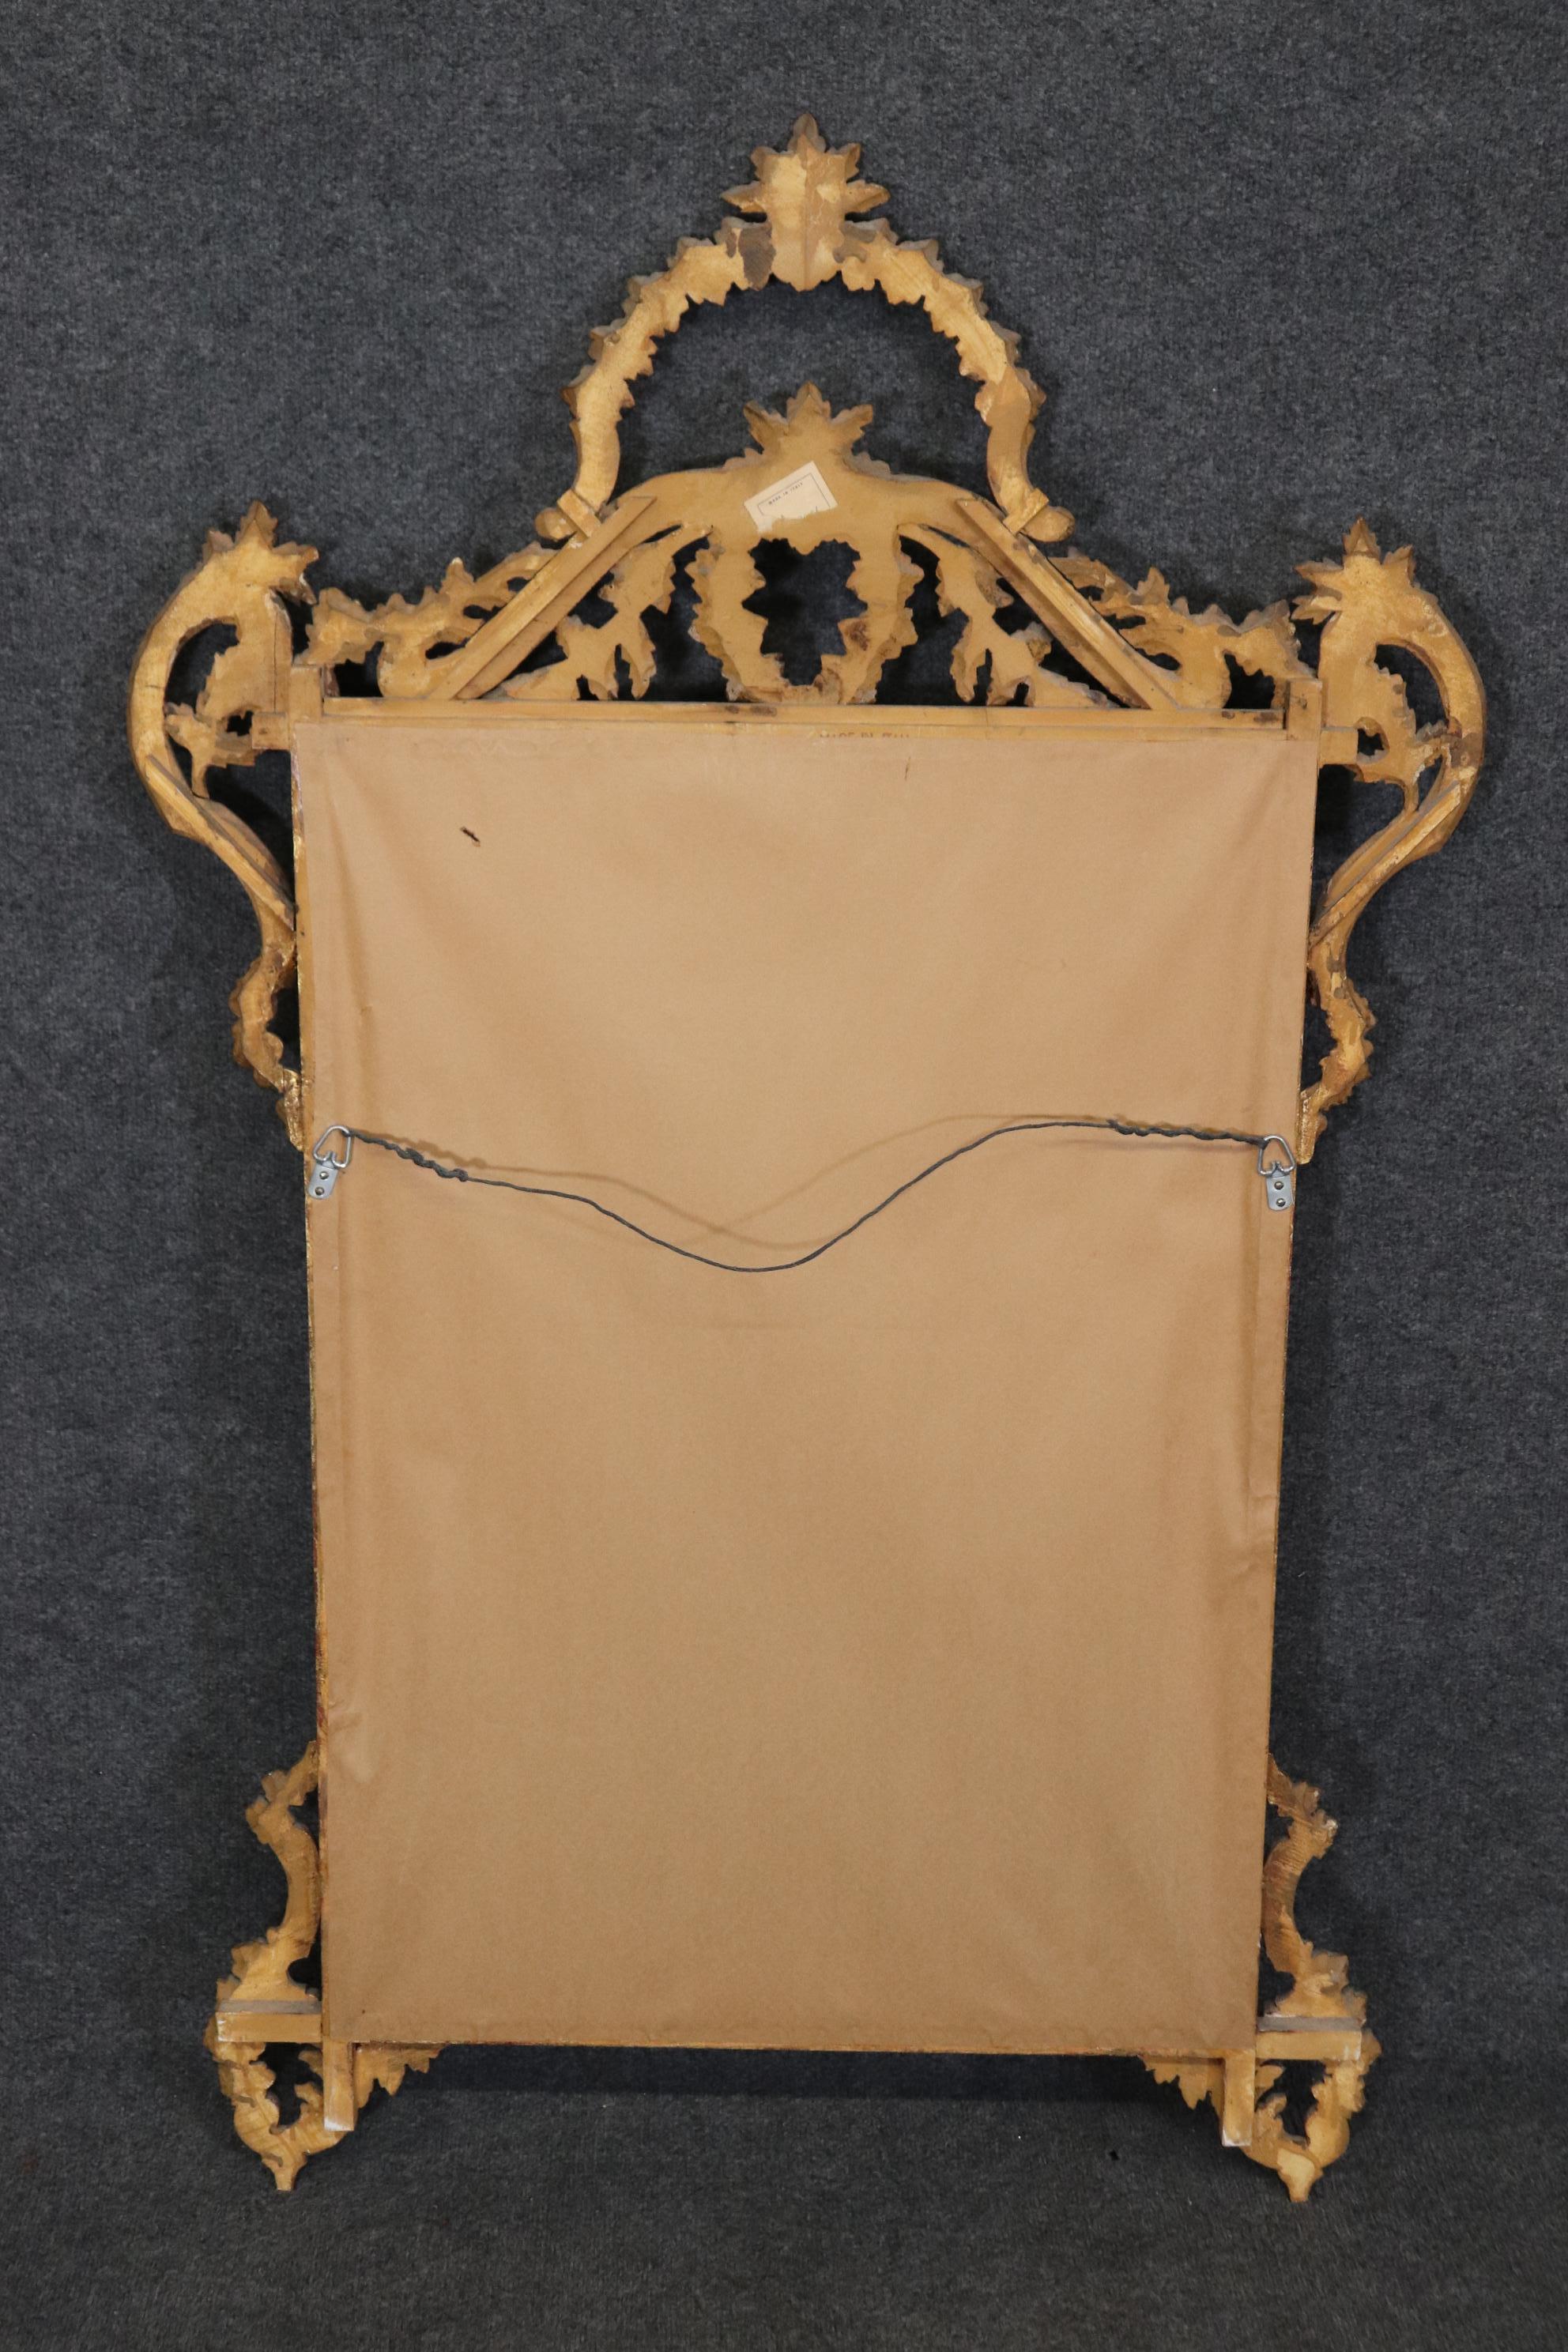 Dimensions- H: 58 1/2 in W: 35 1/4 in D: 2 1/2 in

This Italian Rococo style gold gilt carved accent wall hanging mirror is truly a luxurious piece that will bring a sense of luxury and character into your home or place of choosing!  If you look at